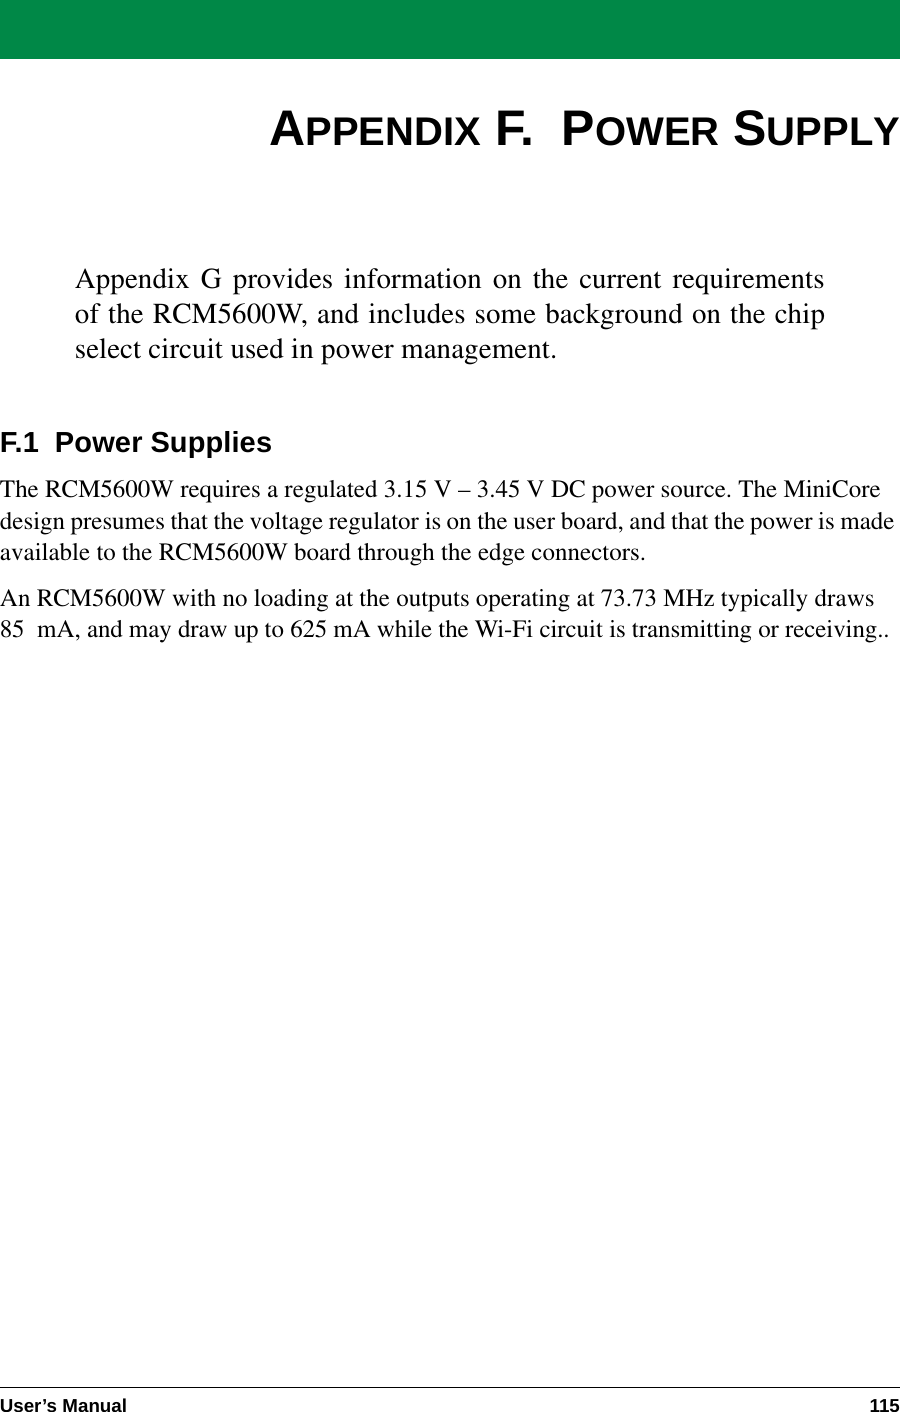 User’s Manual 115APPENDIX F.  POWER SUPPLYAppendix G provides information on the current requirementsof the RCM5600W, and includes some background on the chipselect circuit used in power management.F.1  Power SuppliesThe RCM5600W requires a regulated 3.15 V – 3.45 V DC power source. The MiniCore design presumes that the voltage regulator is on the user board, and that the power is made available to the RCM5600W board through the edge connectors. An RCM5600W with no loading at the outputs operating at 73.73 MHz typically draws 85 mA, and may draw up to 625 mA while the Wi-Fi circuit is transmitting or receiving..